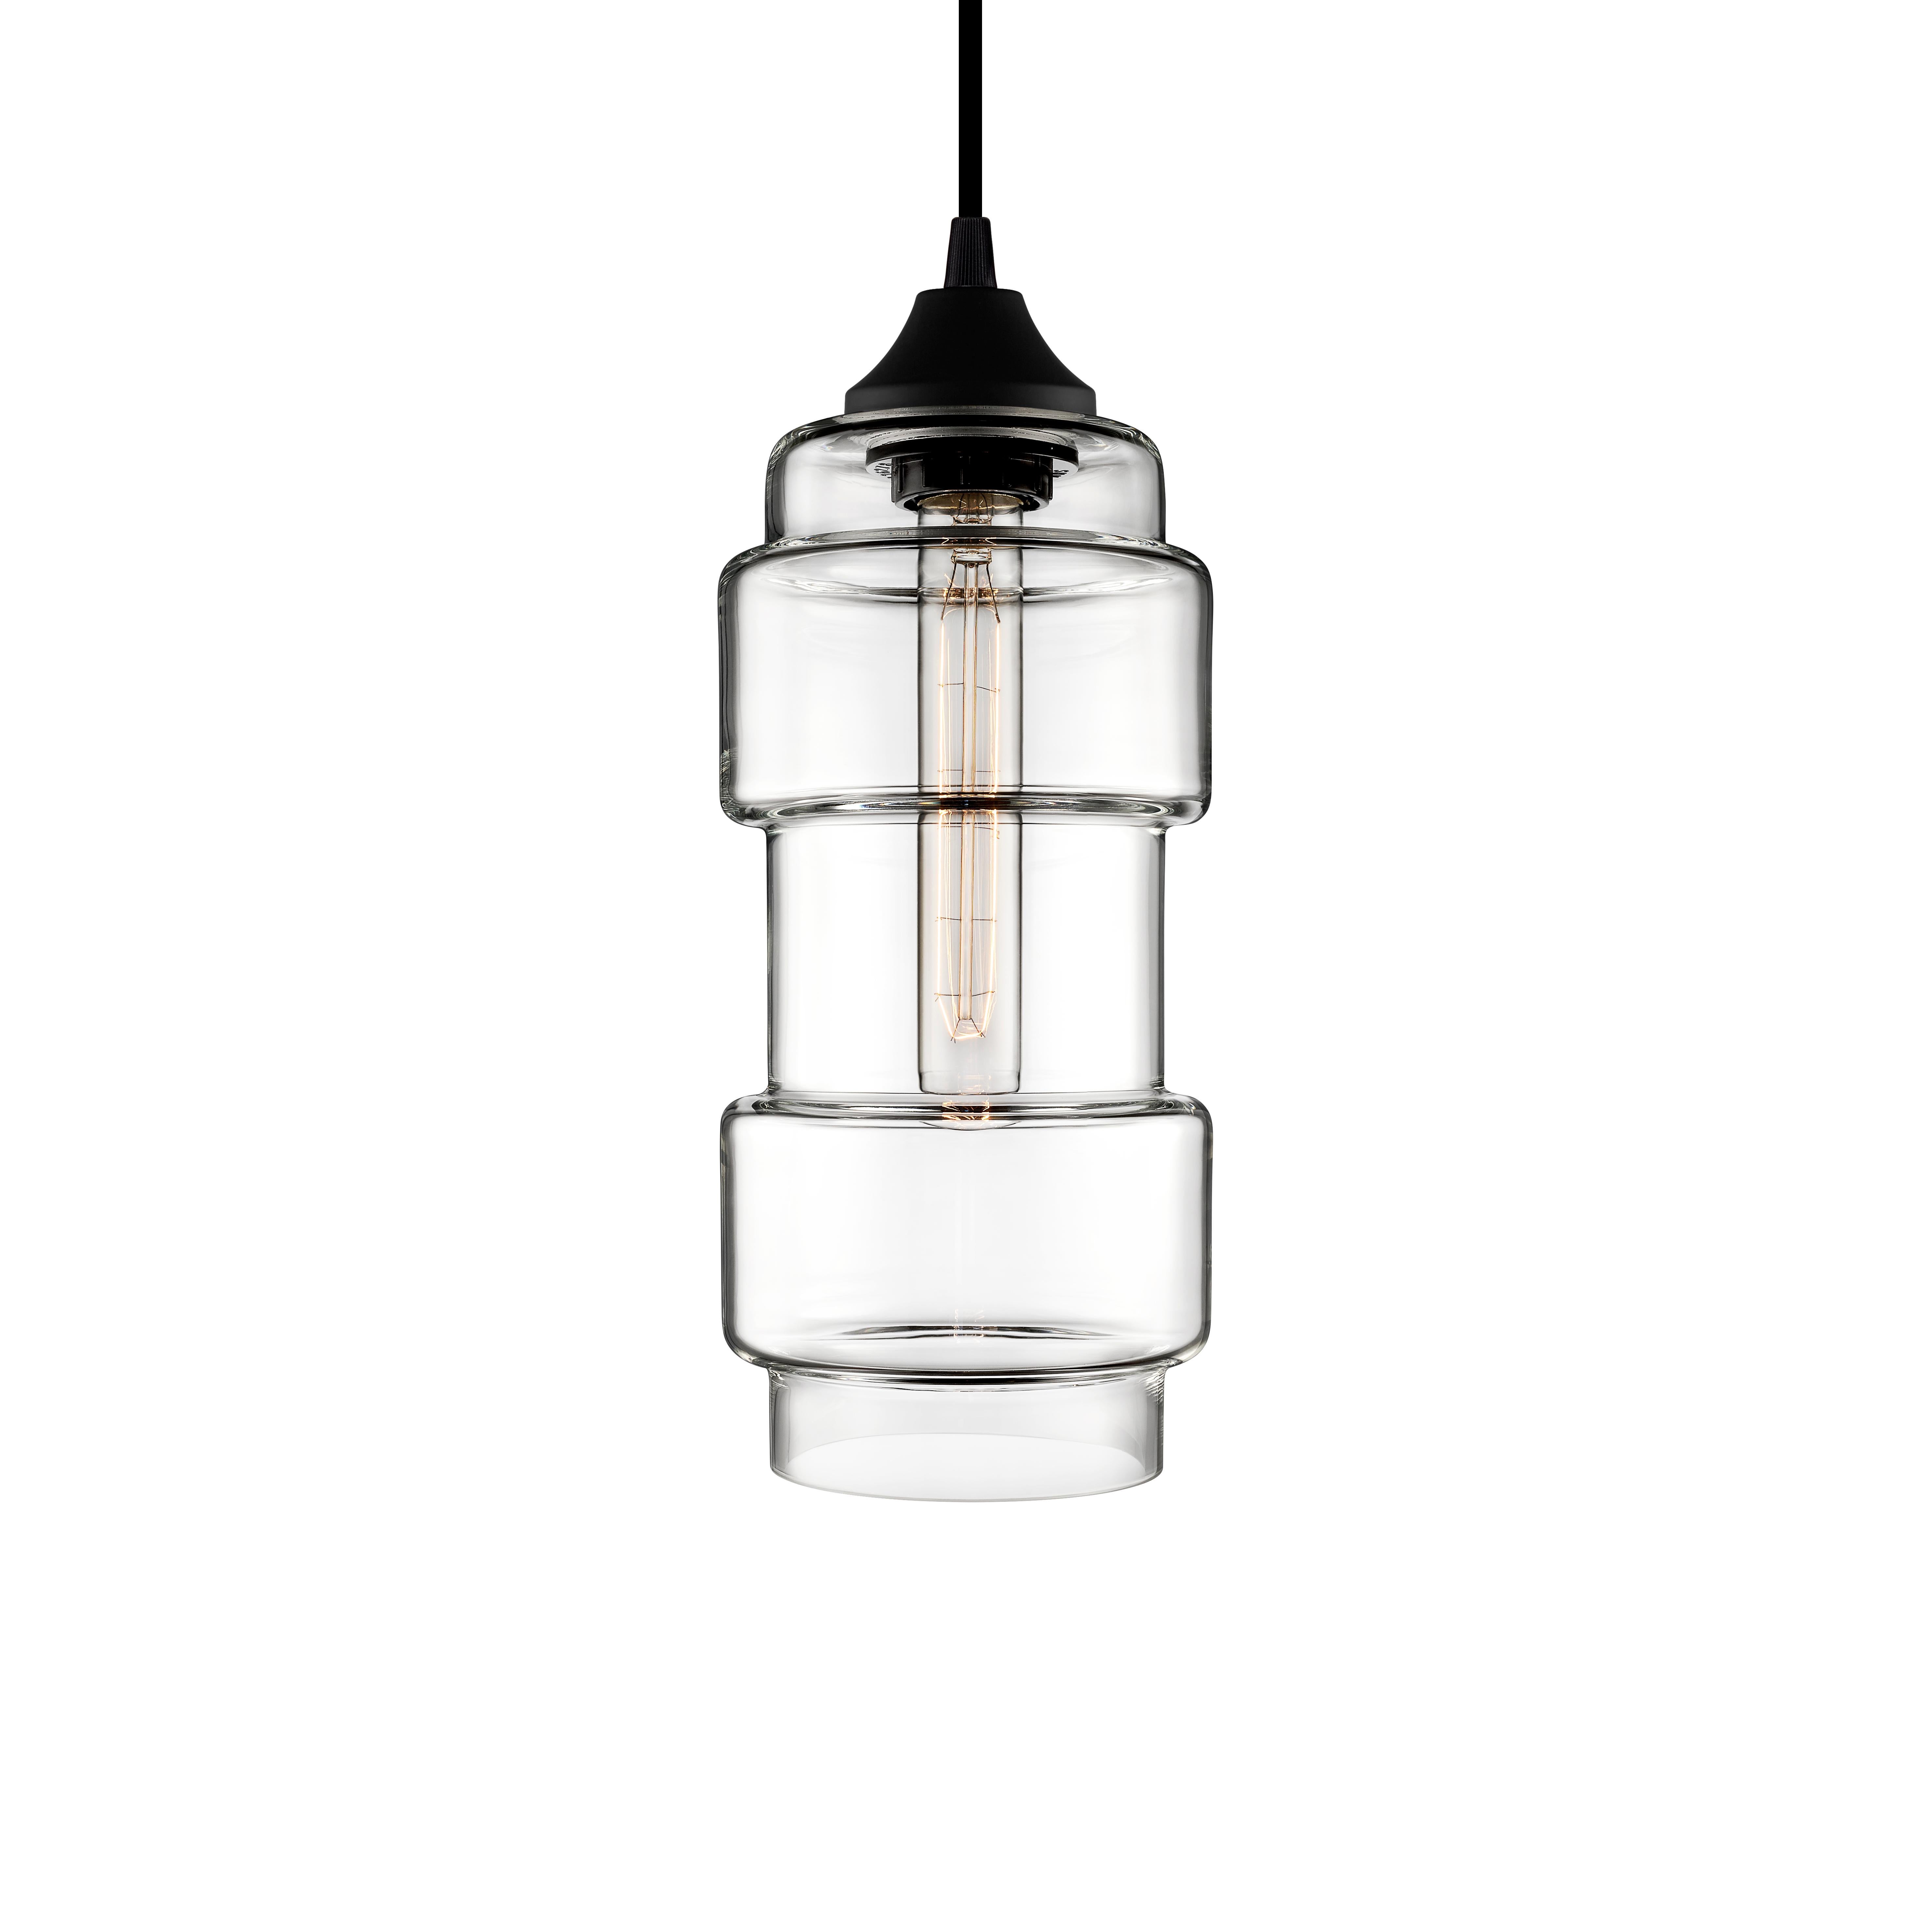 Inspired by ancient castle walls, the defined edges and slender build of the Muralla pendant enhance any setting. Every single glass pendant light that comes from Niche is hand-blown by real human beings in a state-of-the-art studio located in